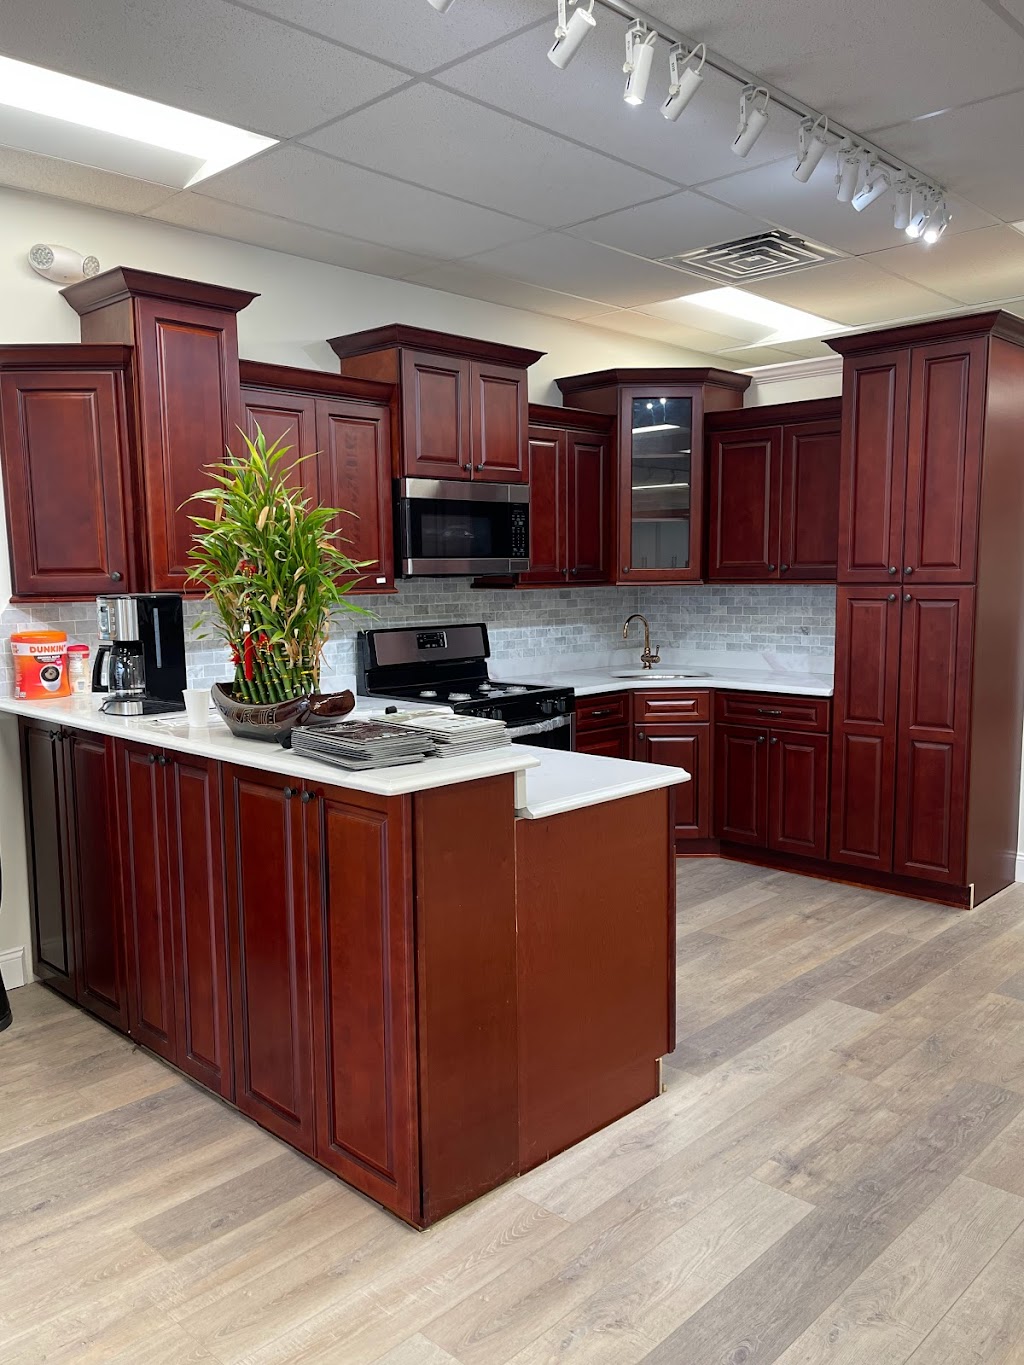 Grand Home Flooring & Cabinetry | 4016 route 9 south, Morganville, NJ 07751 | Phone: (732) 591-1240